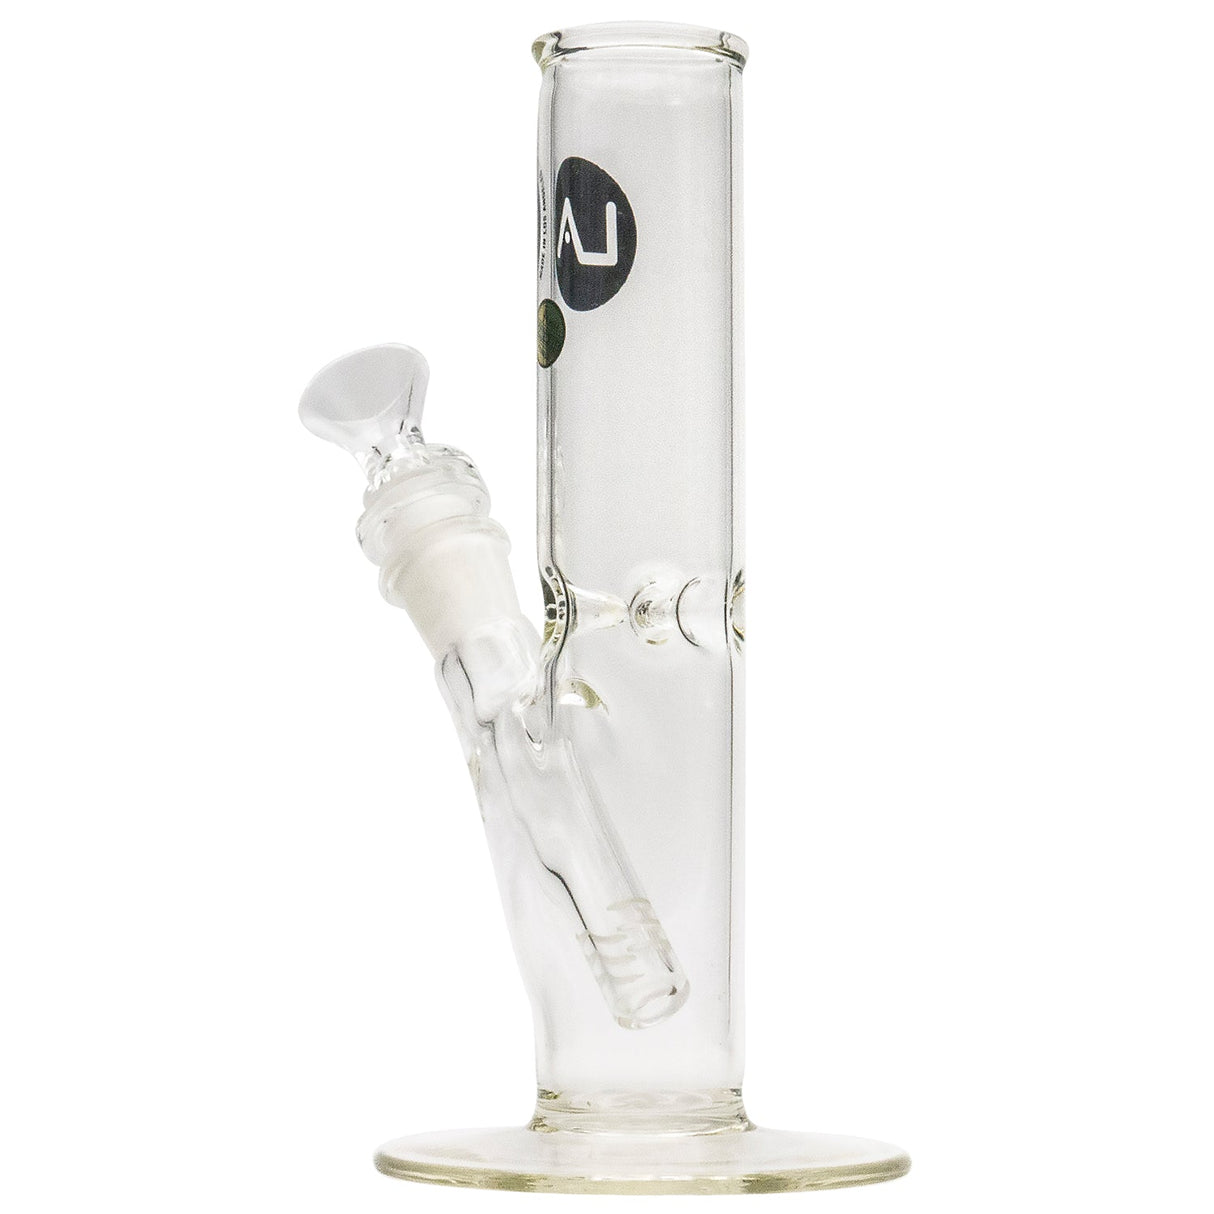 LA Pipes 8" Straight Bong with Ice Pinch, 45 Degree Joint, Front View on White Background